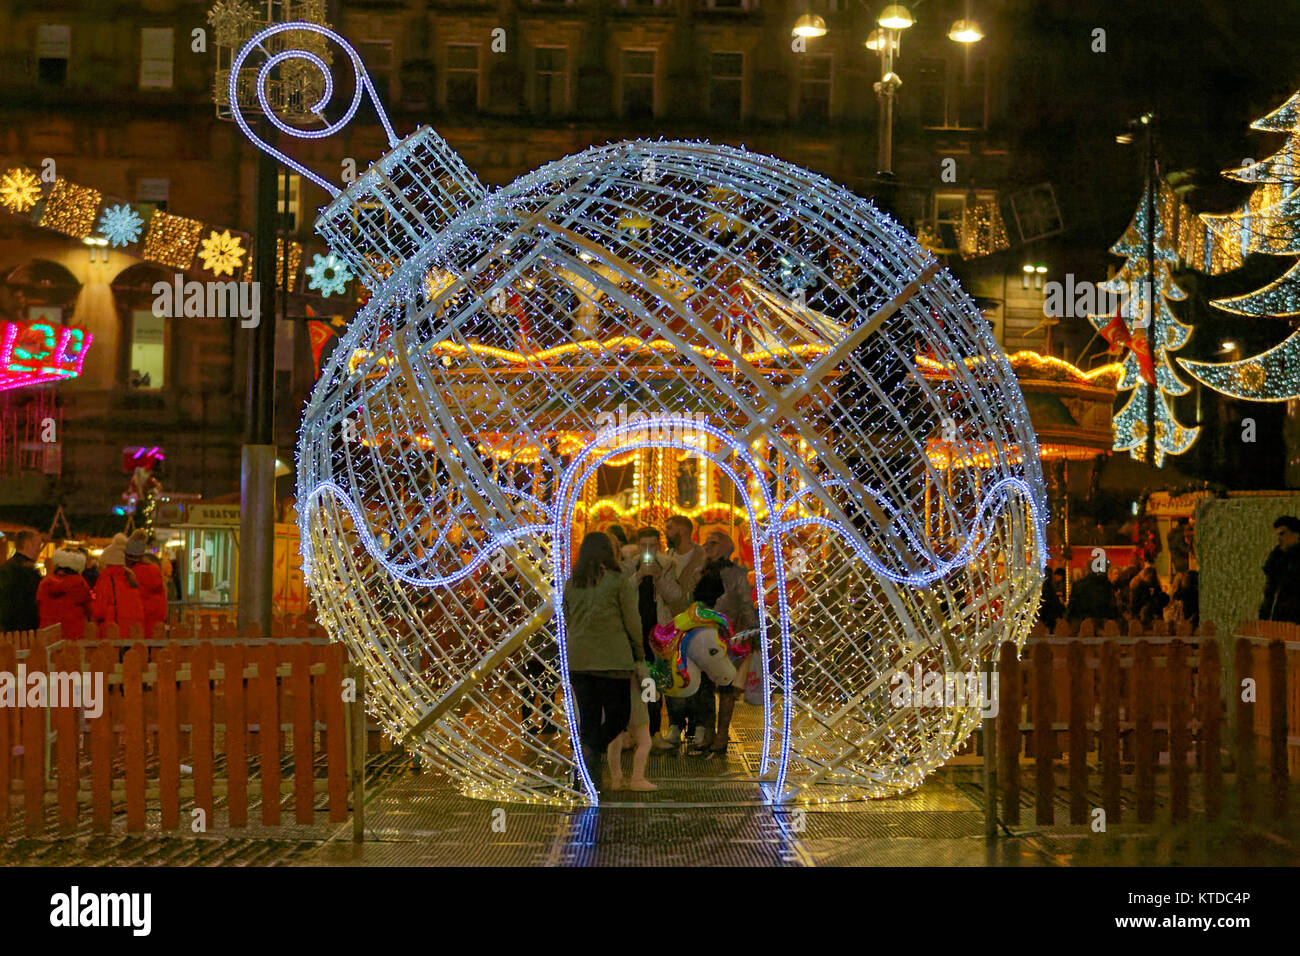 Rain and wind greet the last minute Christmas Eve visitors to the Christmas fayre in the city’s George square. tourists take selfies inside ornament Stock Photo